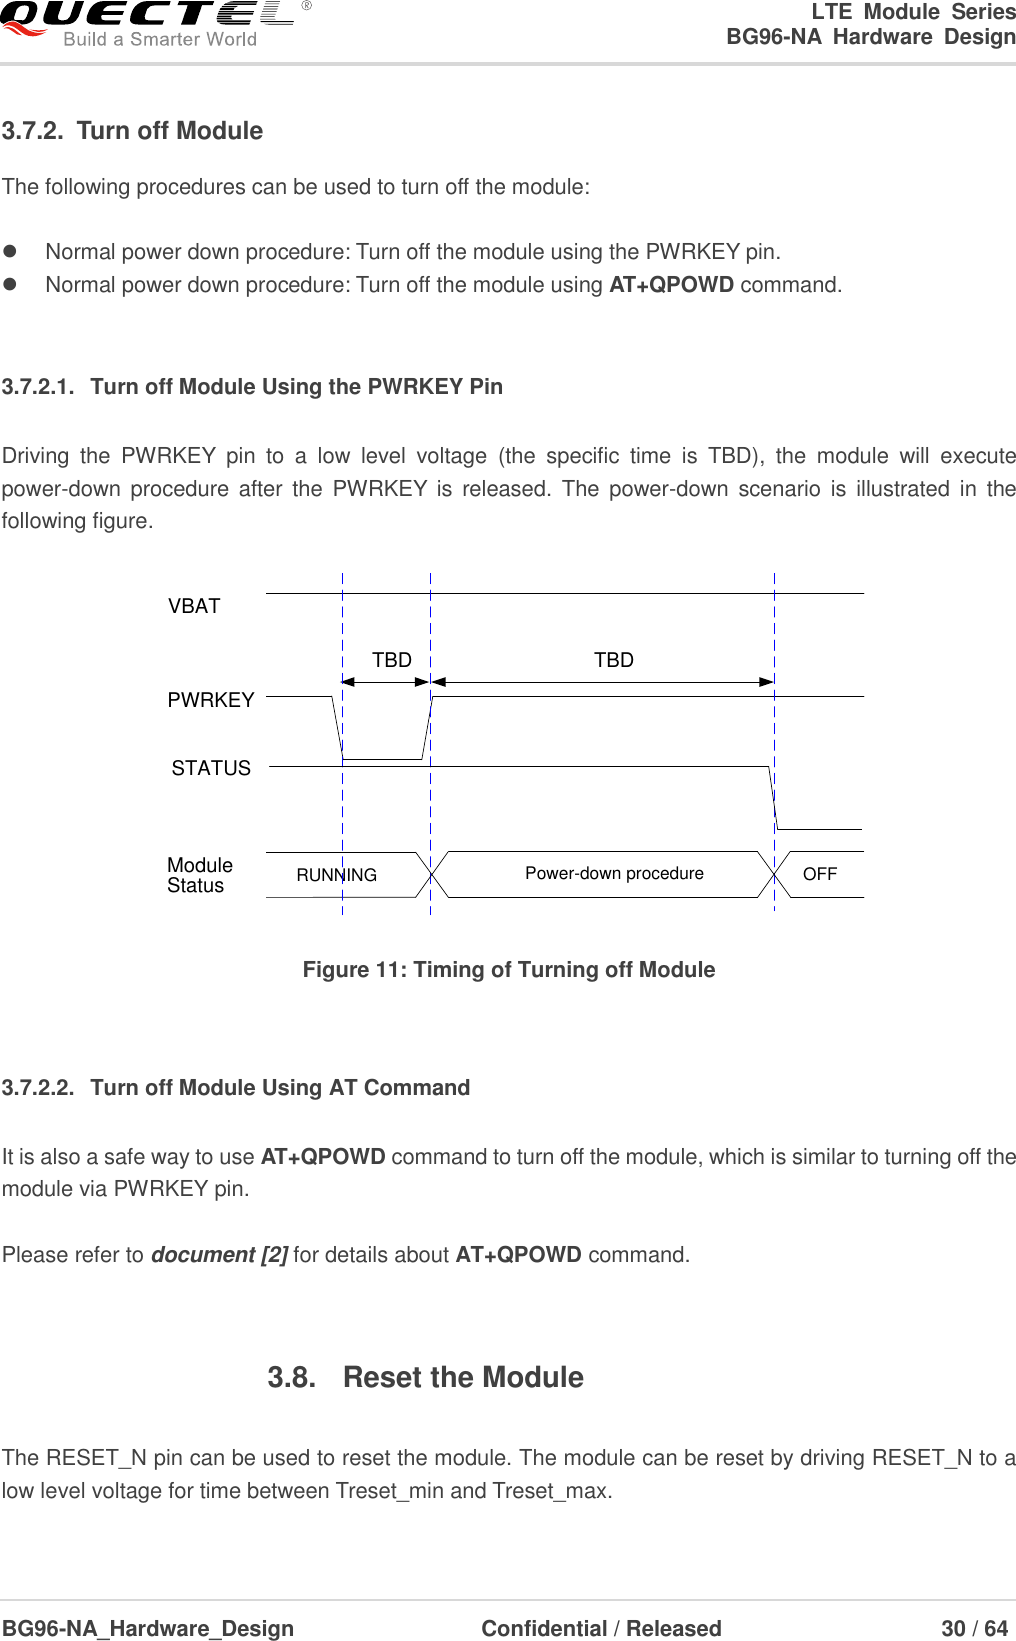 LTE  Module  Series                                                  BG96-NA  Hardware  Design  BG96-NA_Hardware_Design                              Confidential / Released                                  30 / 64    3.7.2.  Turn off Module The following procedures can be used to turn off the module:    Normal power down procedure: Turn off the module using the PWRKEY pin.   Normal power down procedure: Turn off the module using AT+QPOWD command.  3.7.2.1.  Turn off Module Using the PWRKEY Pin Driving  the  PWRKEY  pin  to  a  low  level  voltage  (the  specific  time  is  TBD),  the  module  will  execute power-down procedure after the  PWRKEY  is  released.  The  power-down  scenario  is  illustrated in  the following figure. VBATPWRKEYTBDTBDRUNNING Power-down procedure OFFModuleStatusSTATUS Figure 11: Timing of Turning off Module  3.7.2.2.  Turn off Module Using AT Command It is also a safe way to use AT+QPOWD command to turn off the module, which is similar to turning off the module via PWRKEY pin.  Please refer to document [2] for details about AT+QPOWD command.  3.8.  Reset the Module  The RESET_N pin can be used to reset the module. The module can be reset by driving RESET_N to a low level voltage for time between Treset_min and Treset_max.  